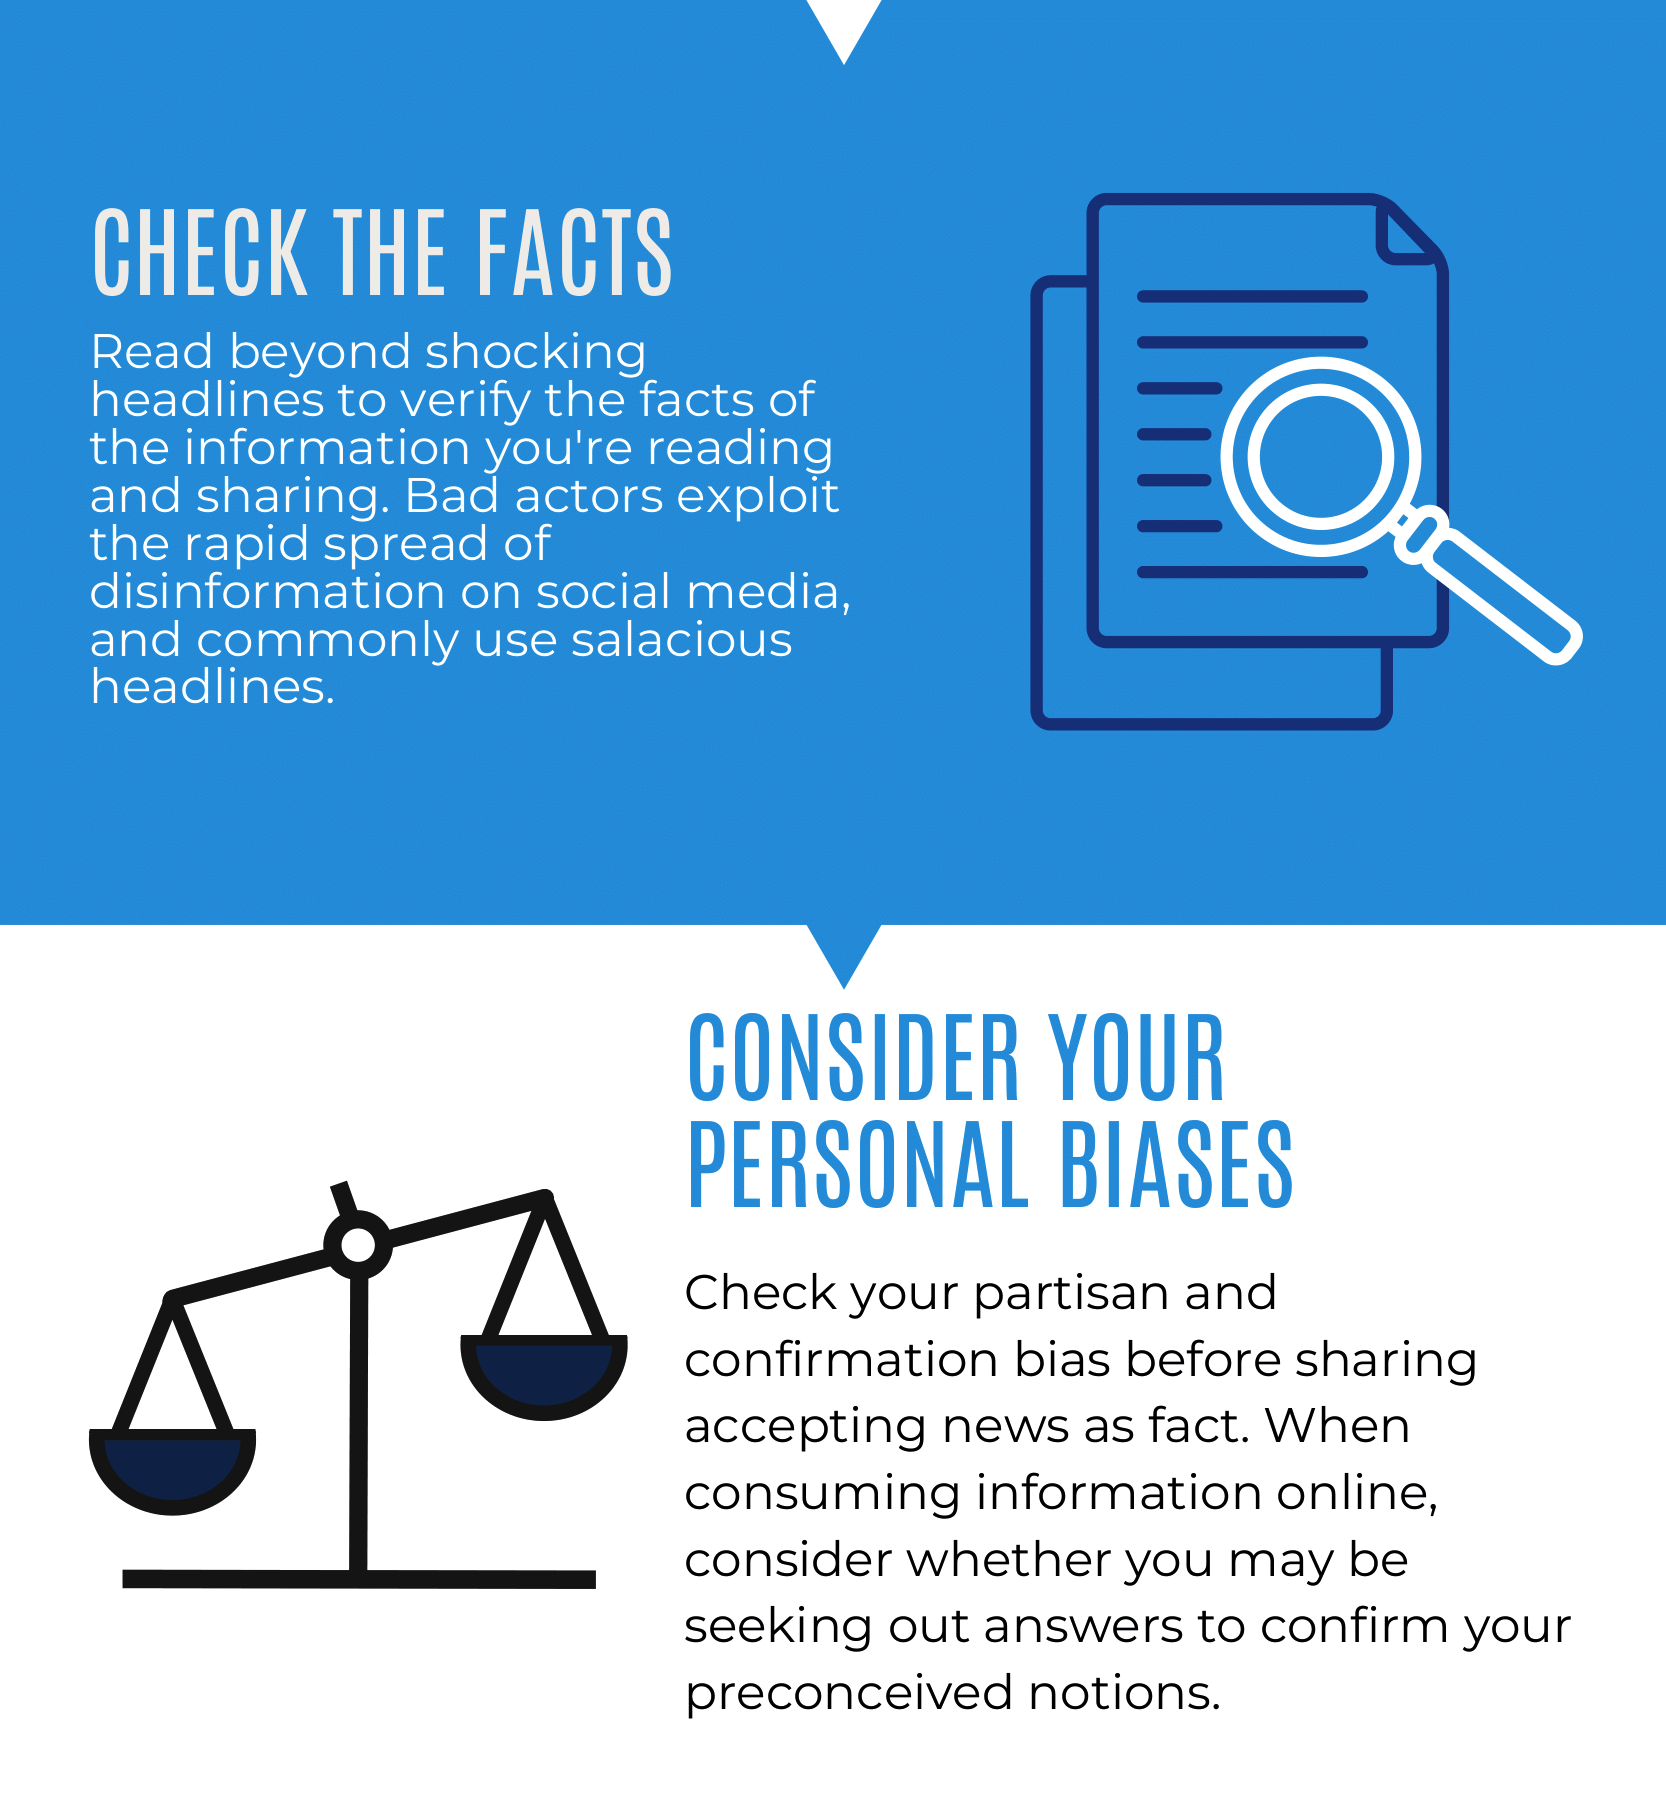 Check the Facts: Read beyond shocking headlines to verify the facts of the information you're reading and sharing. Bad actors exploit the rapid spread of disinformation on social media, and commonly use salacious headlines. Consider your personal biases: